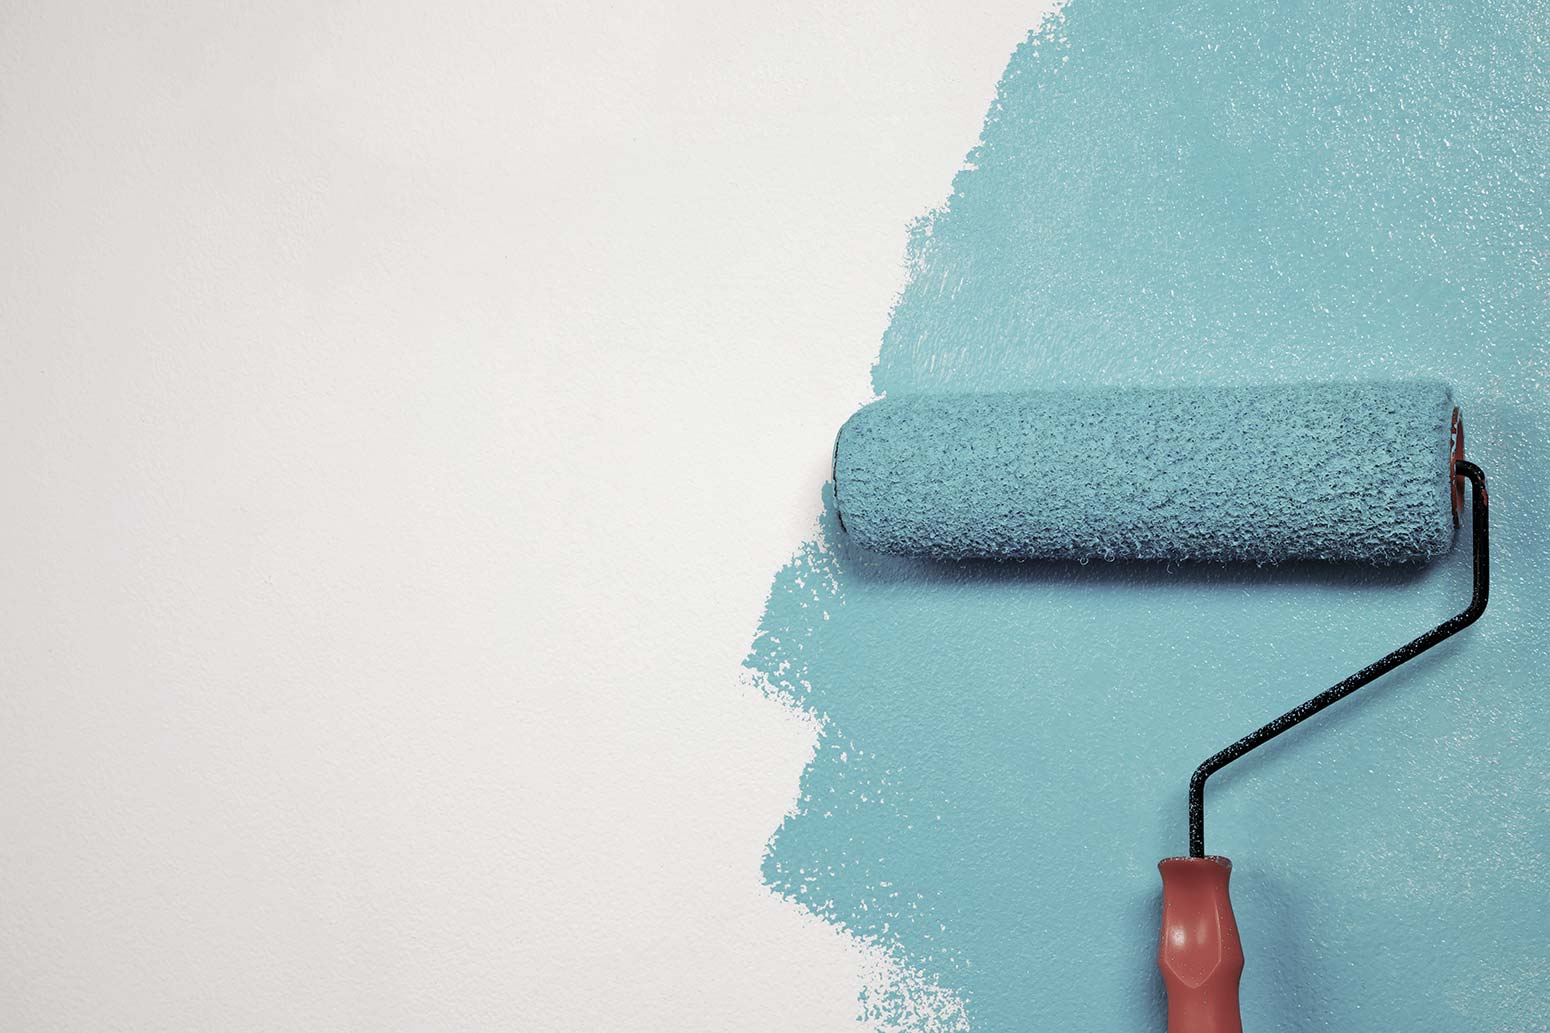 Paint roller adding blue paint to a white background